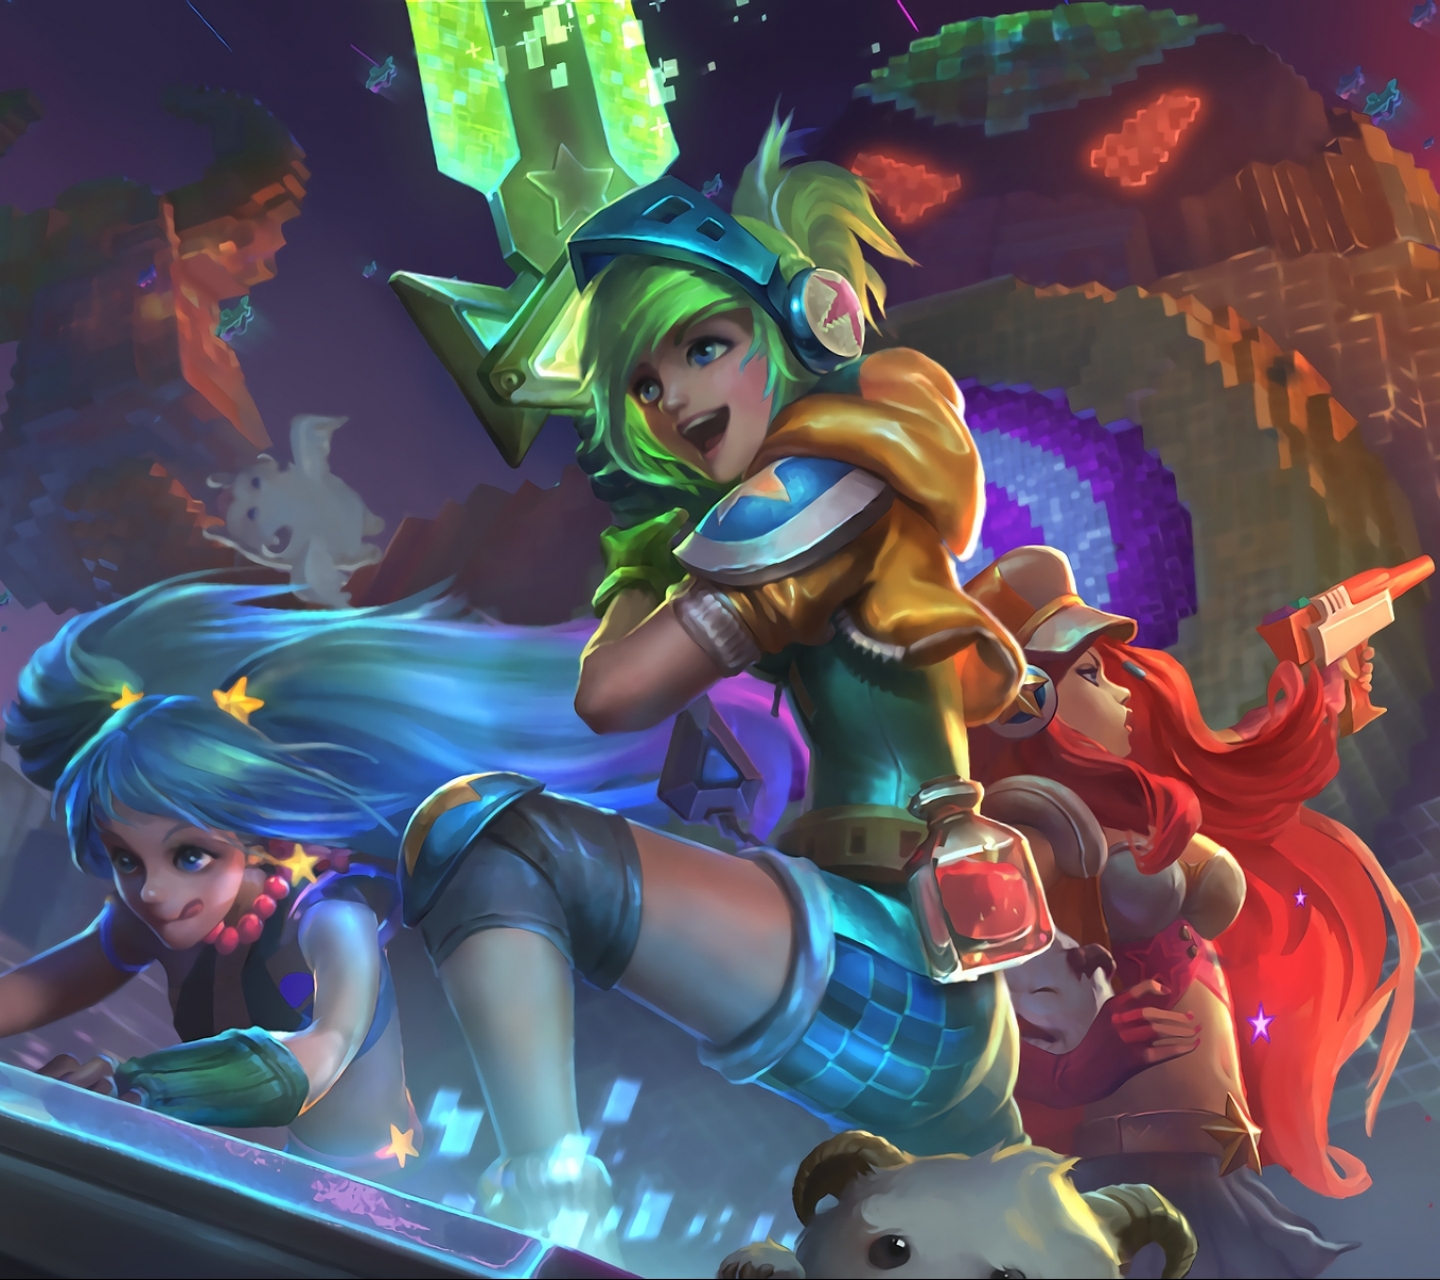 video game, league of legends, sona (league of legends), hecarim (league of legends), miss fortune (league of legends), riven (league of legends)